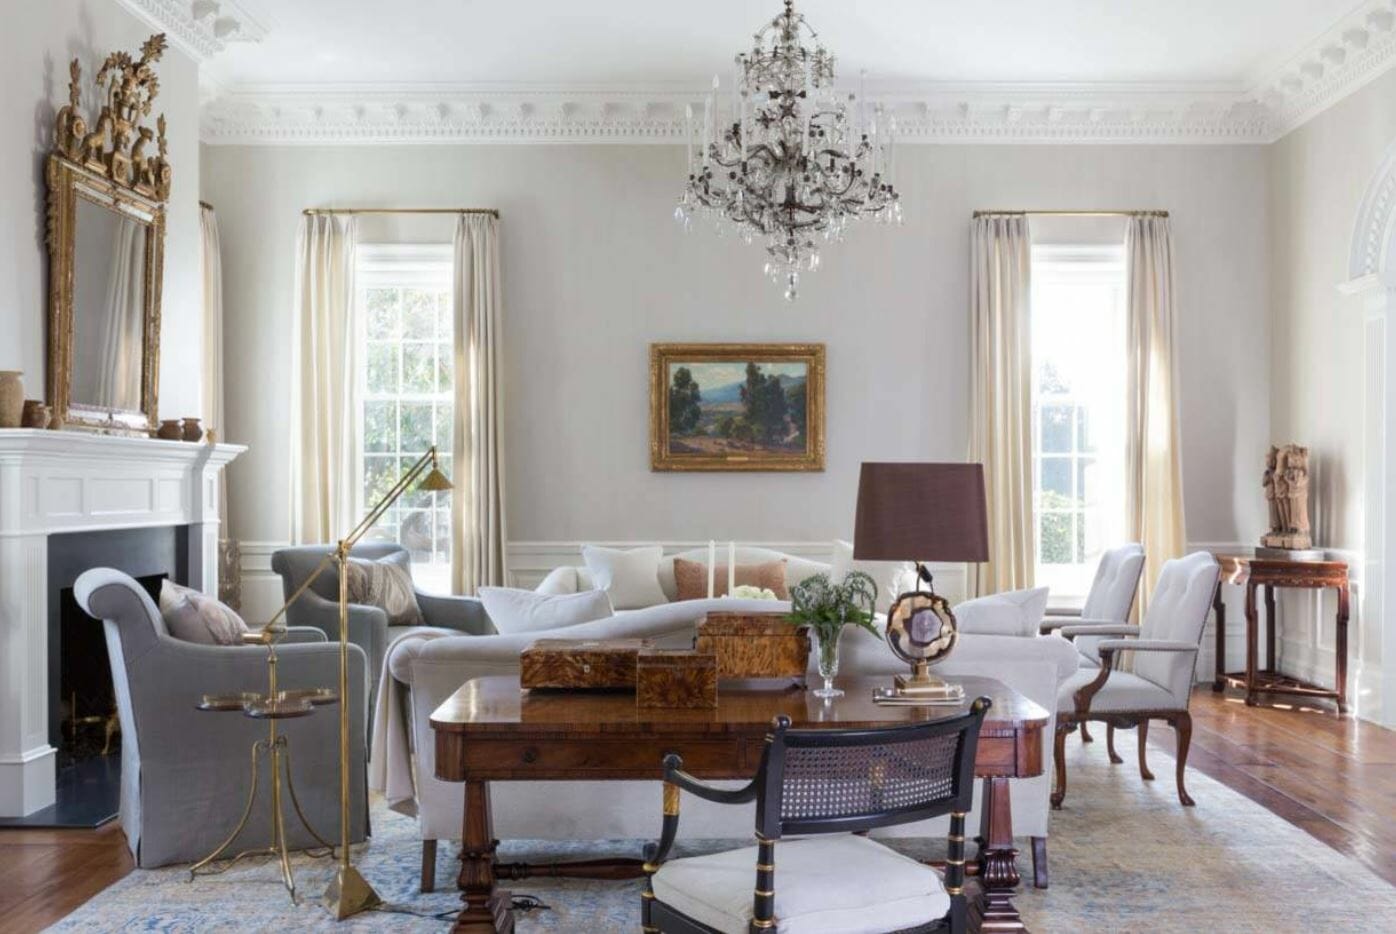 Traditional Interior Design: 7 Best Tips to Create a Beautiful Room -